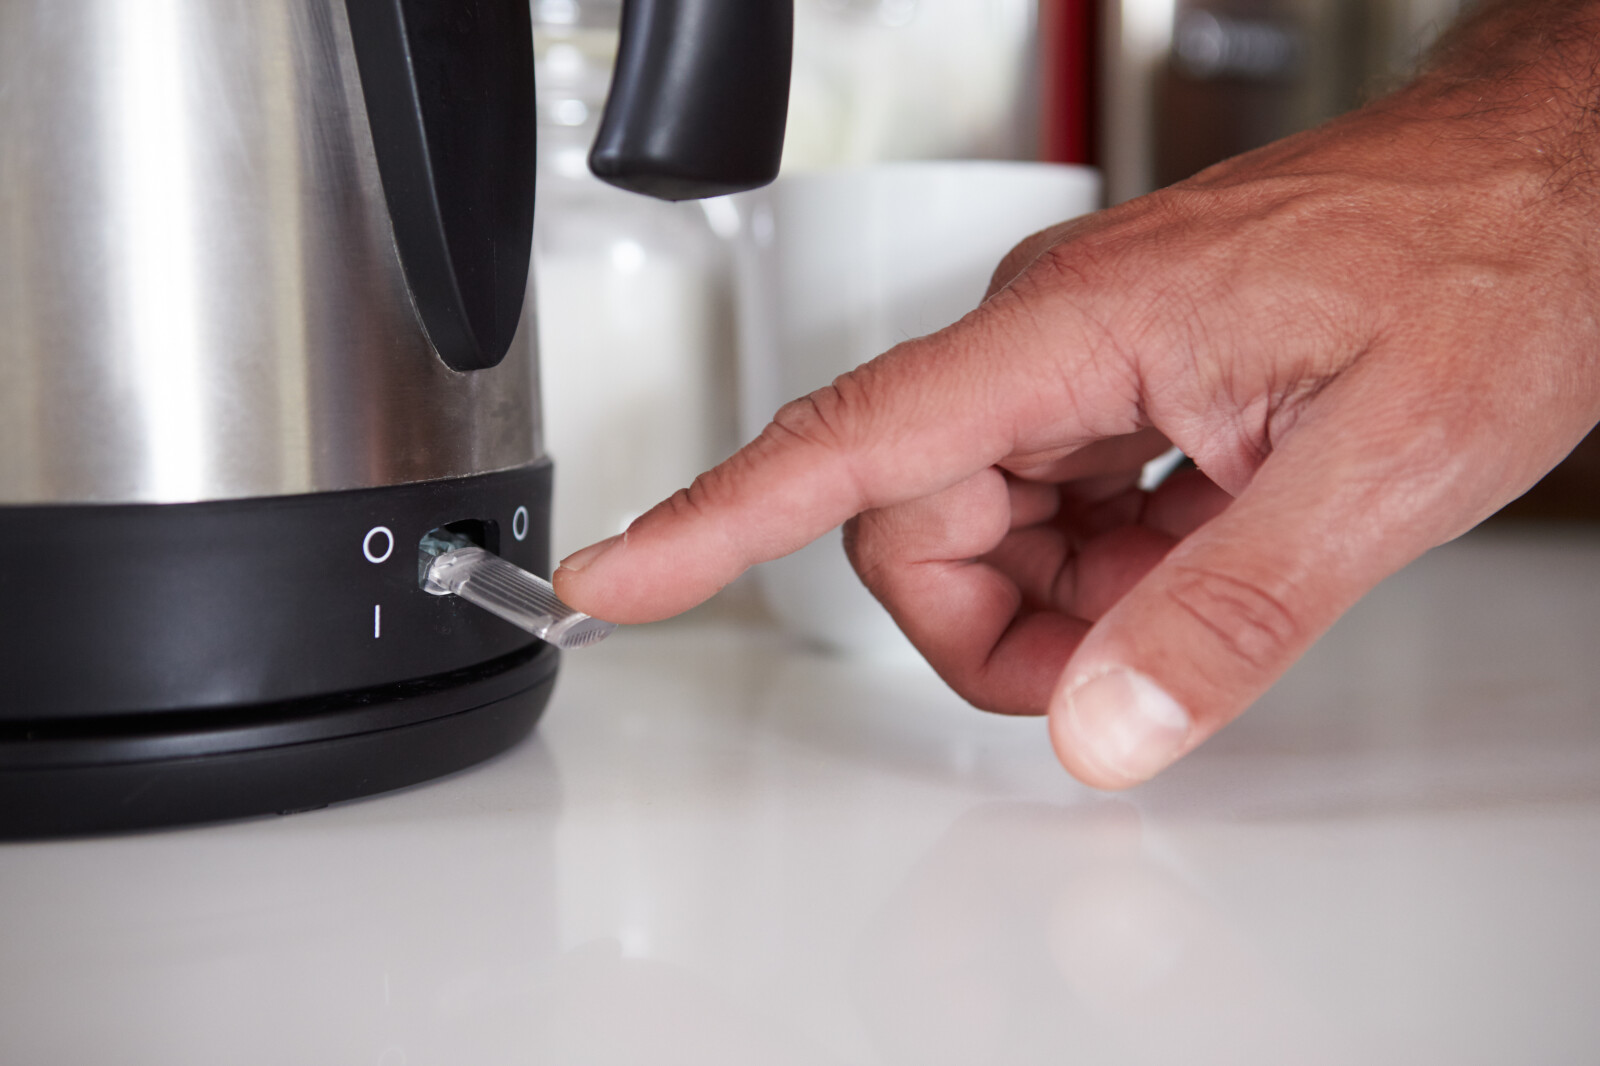 Close up image of a man turning on his kettle